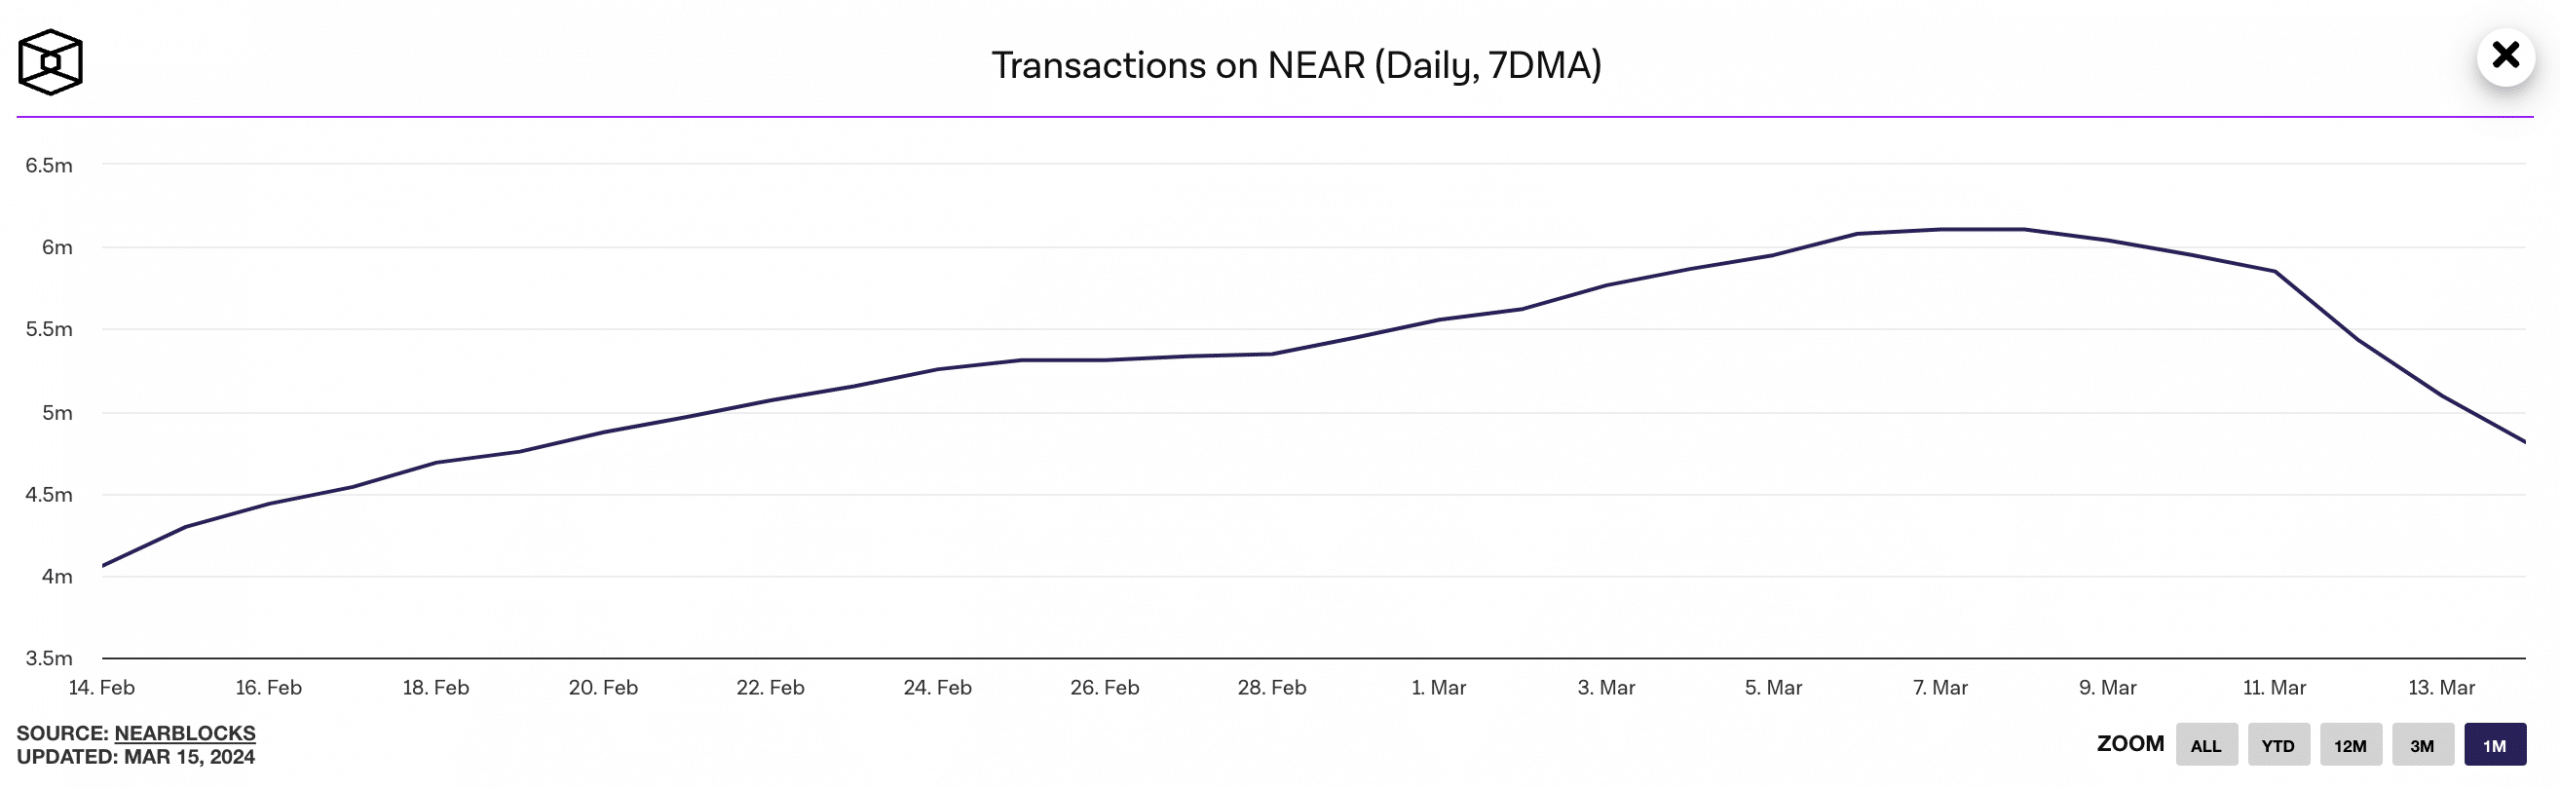 Near Transactions Count